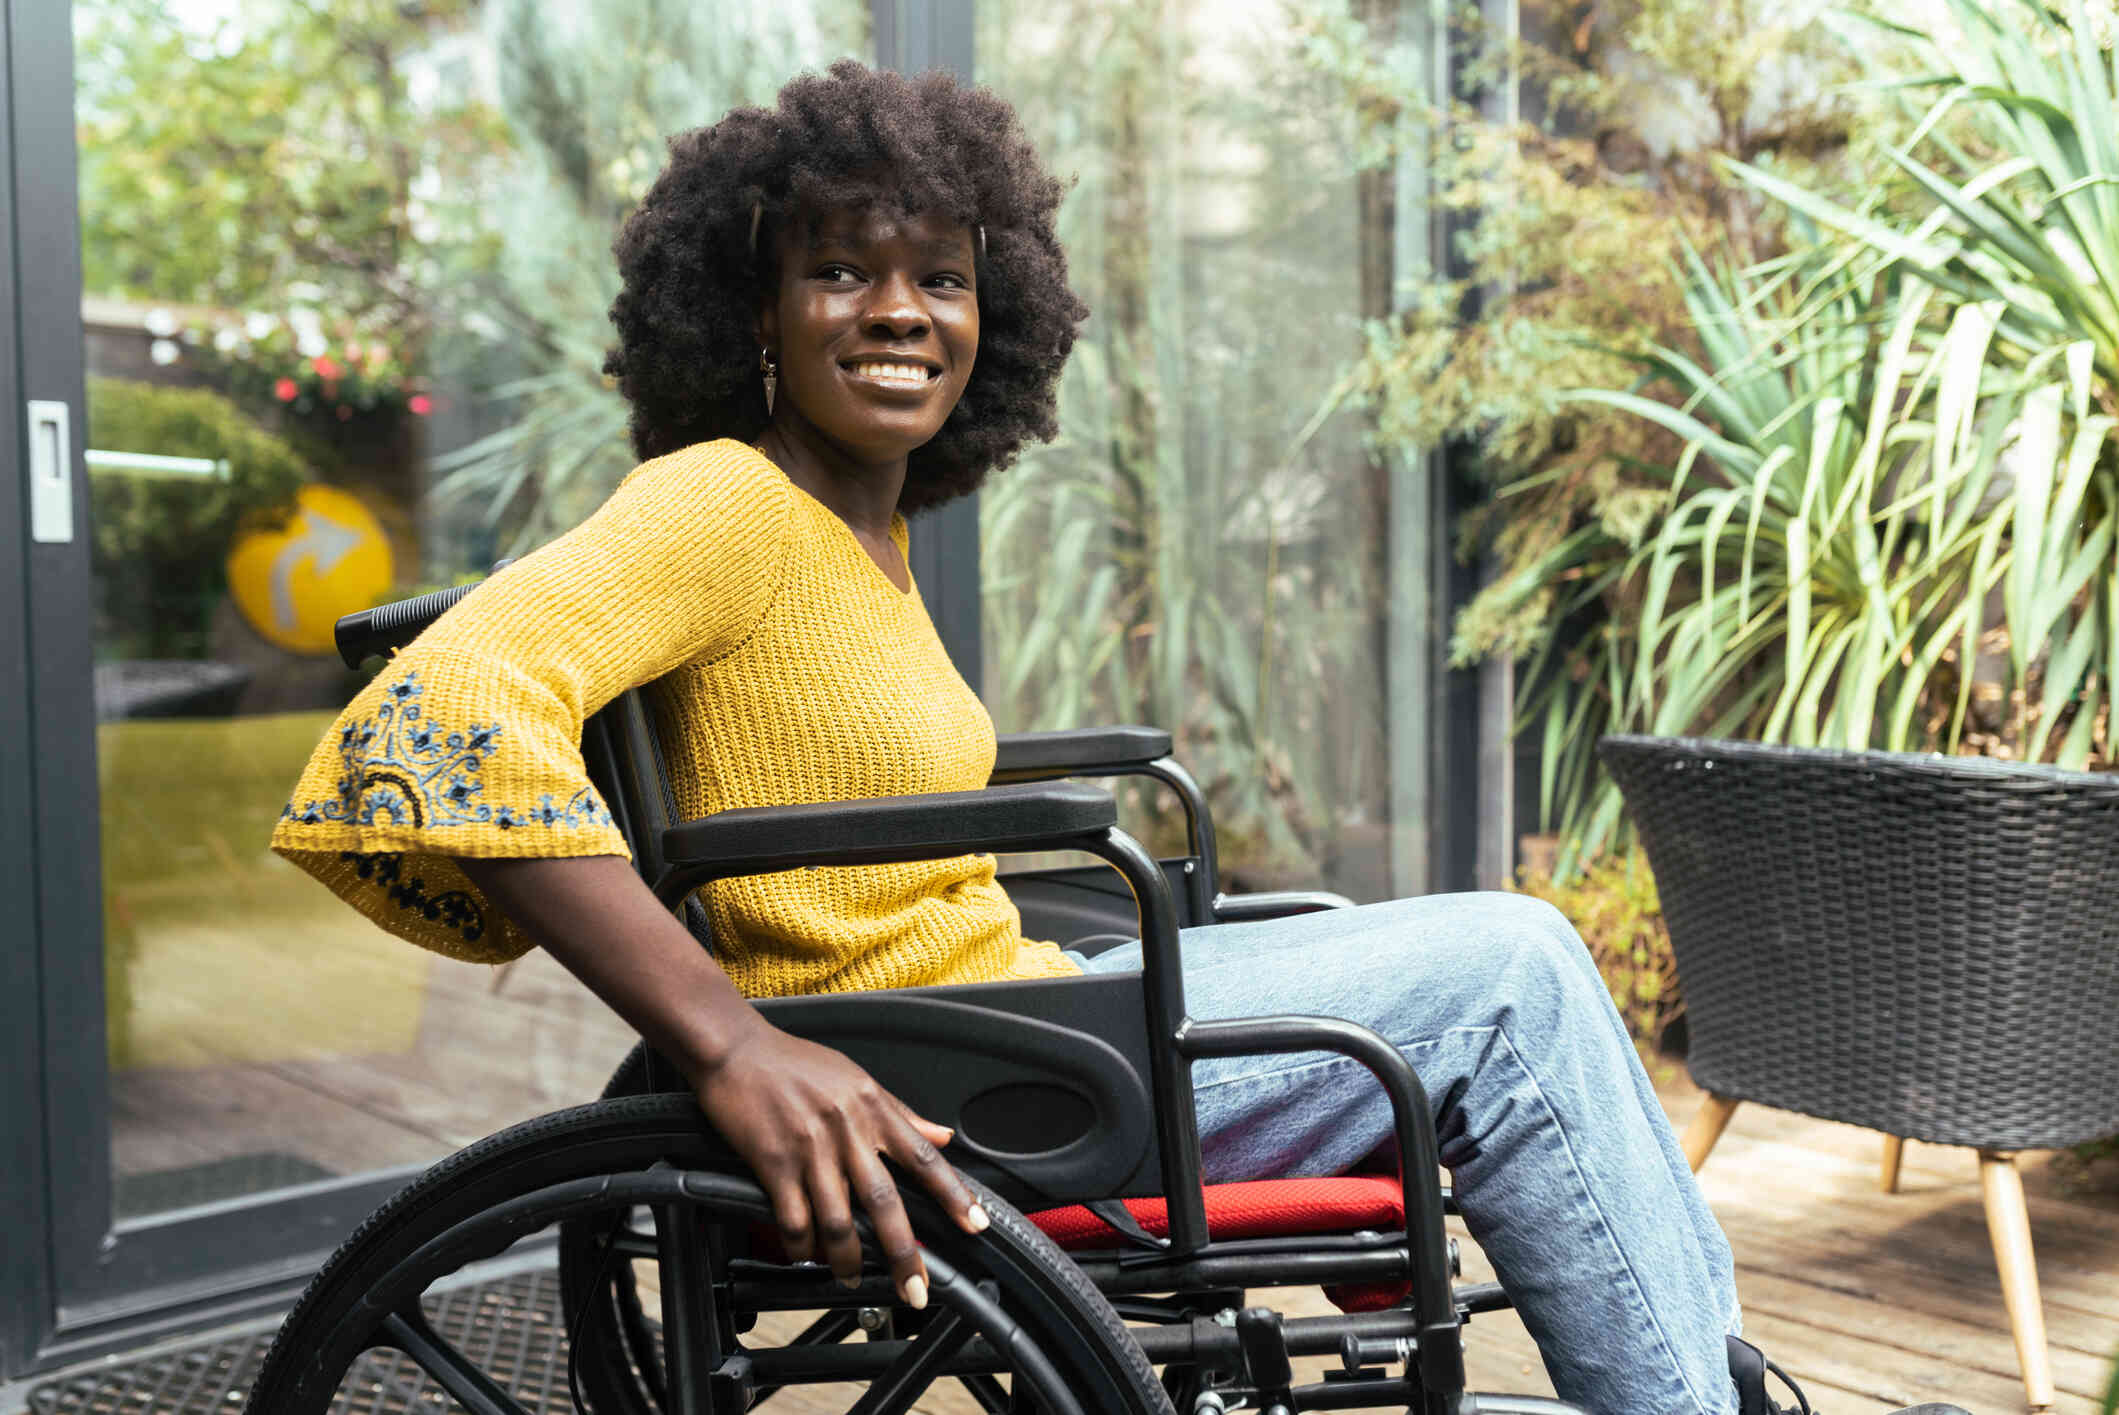 A woman in a yellow shirt sits in a wheelchair outside on a sunny day and smiles while gazing off.